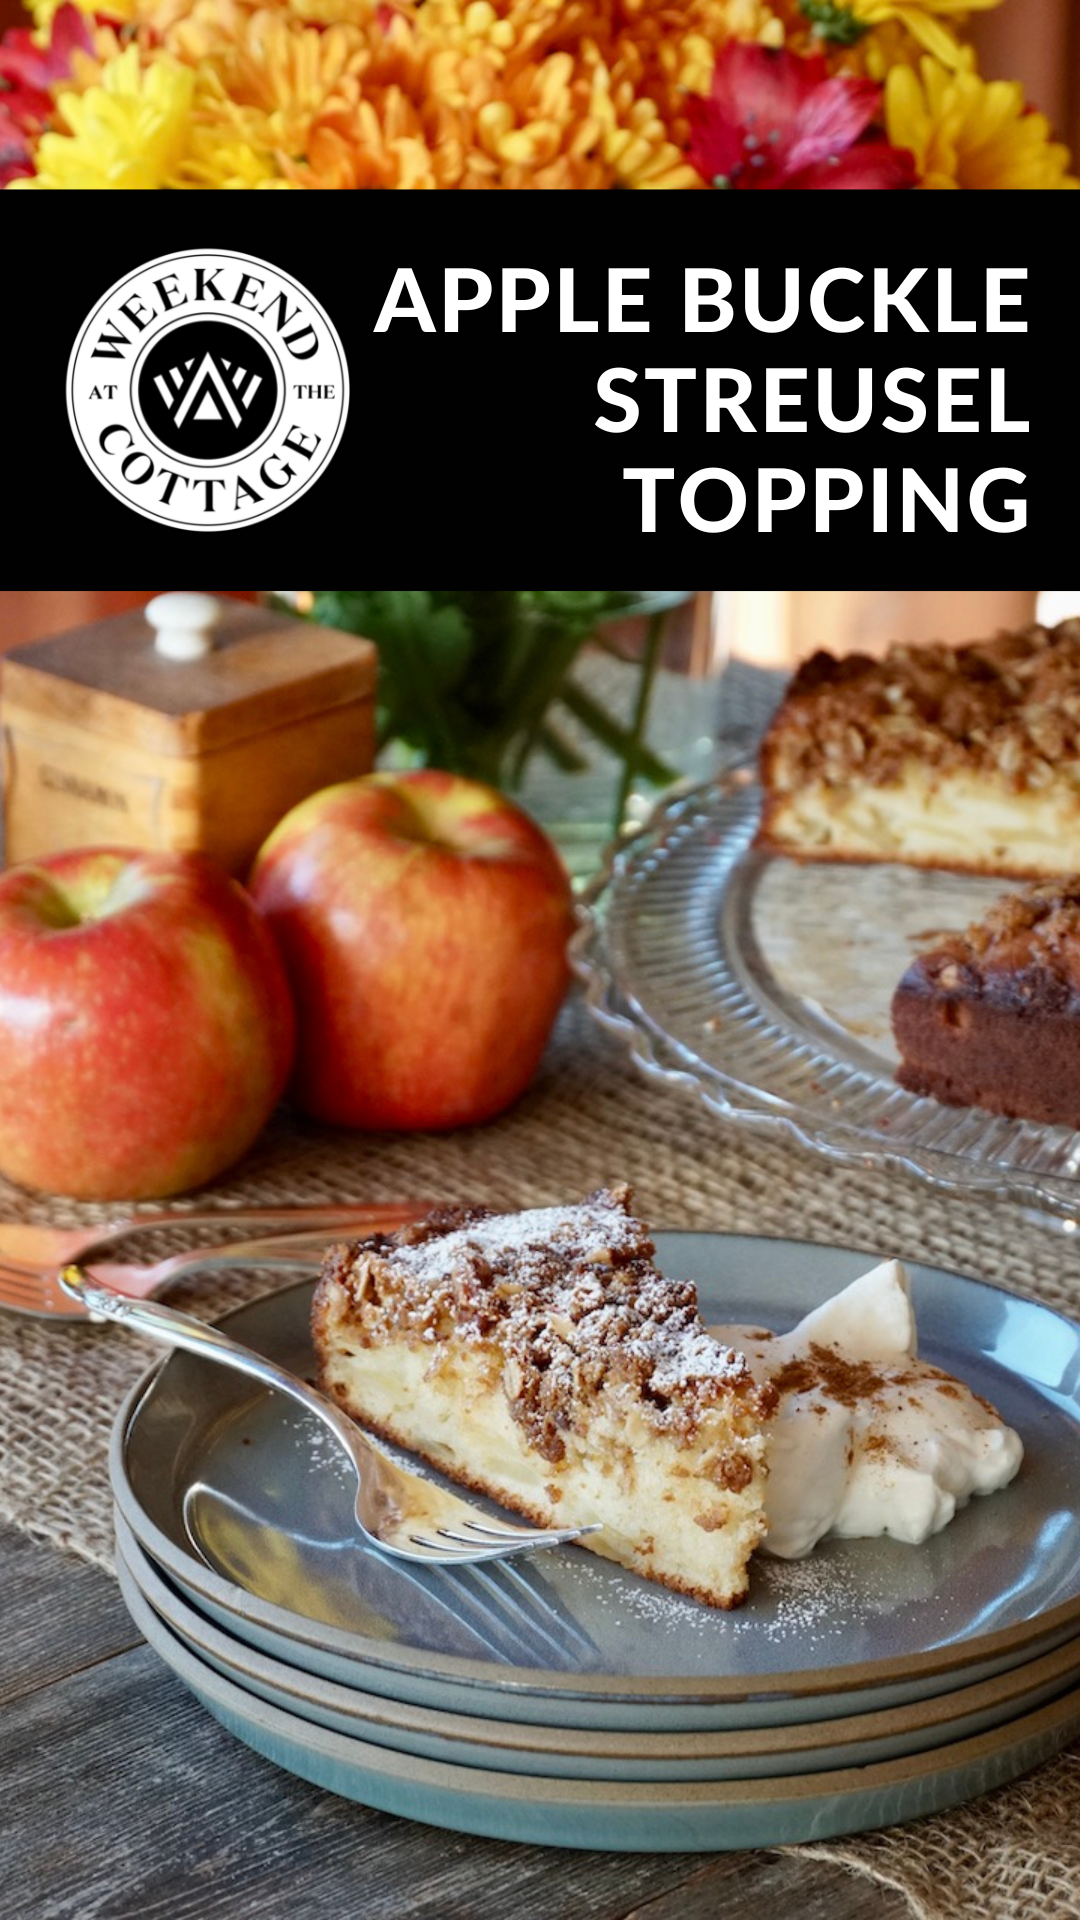 Apple Buckle With Streusel Topping